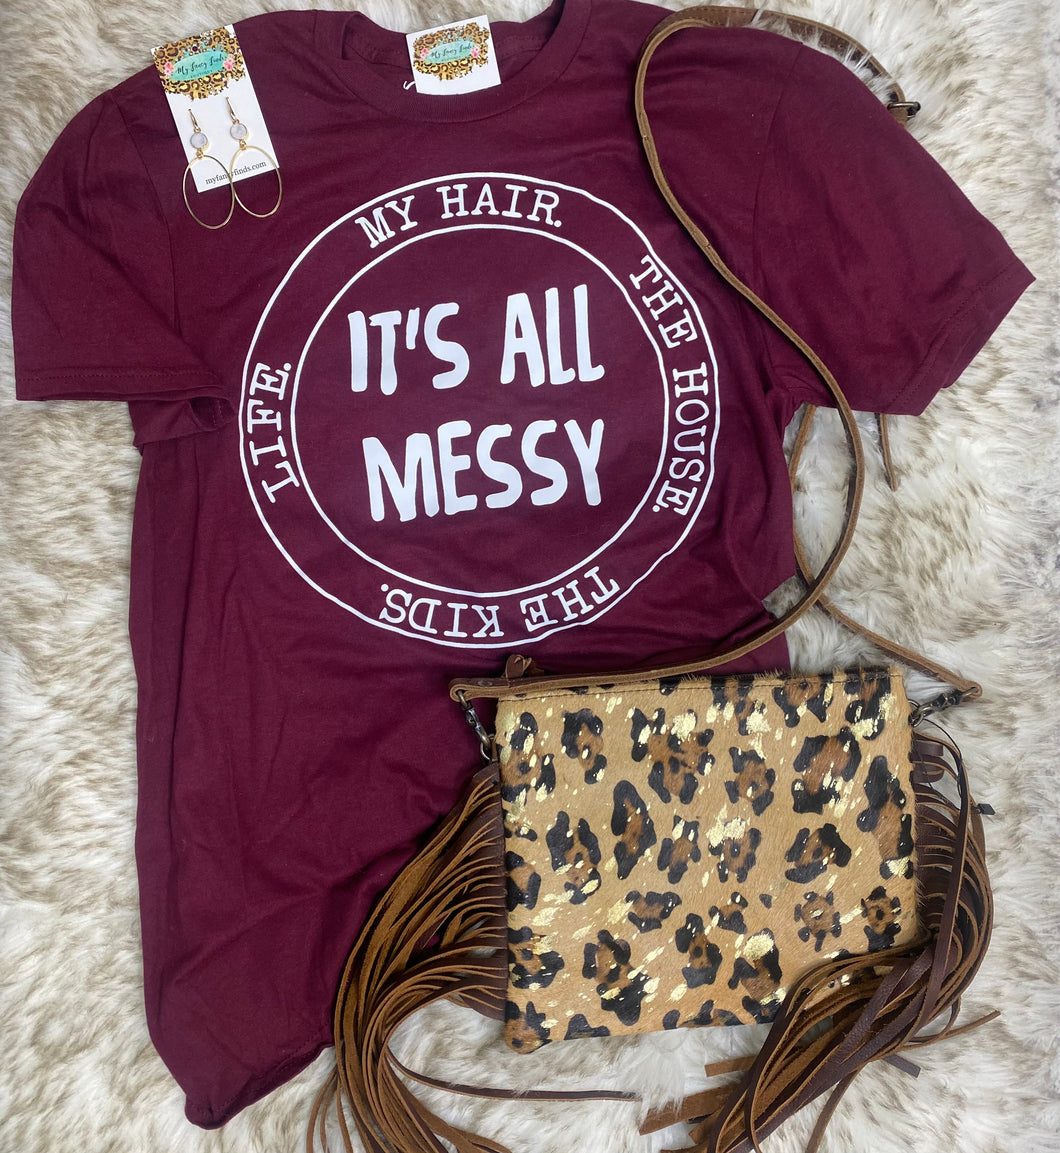 It's ALL Messy graphic tee